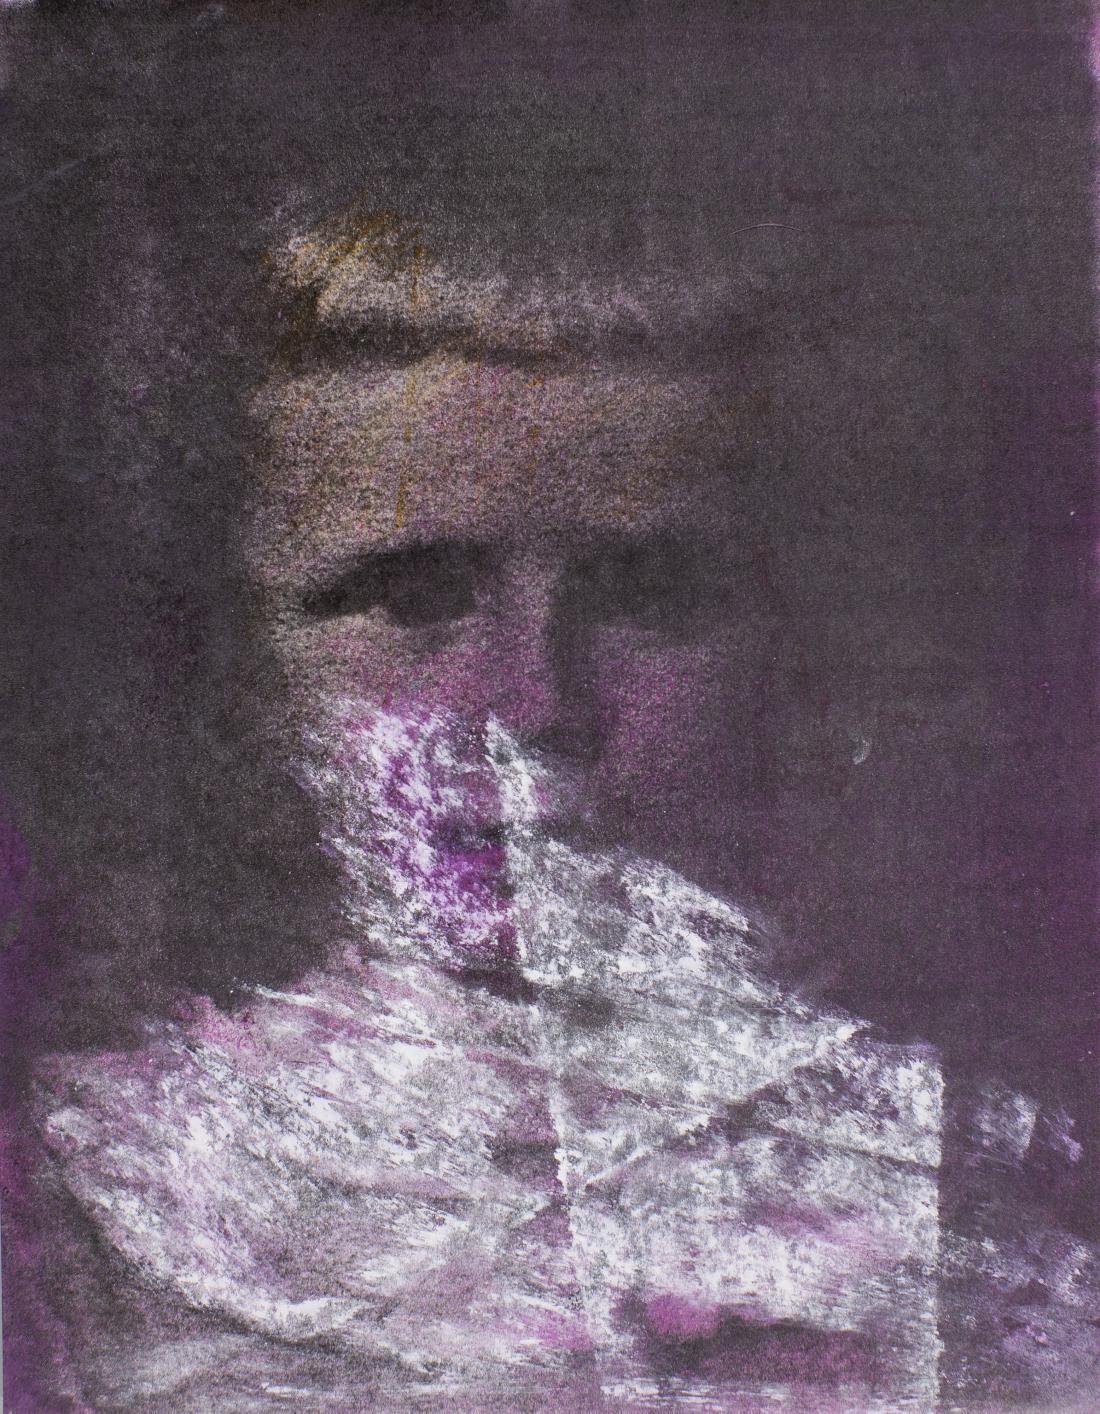 [Untitled] (Printed image of a child in black and white with purple watercolor and white chalk superimposed )